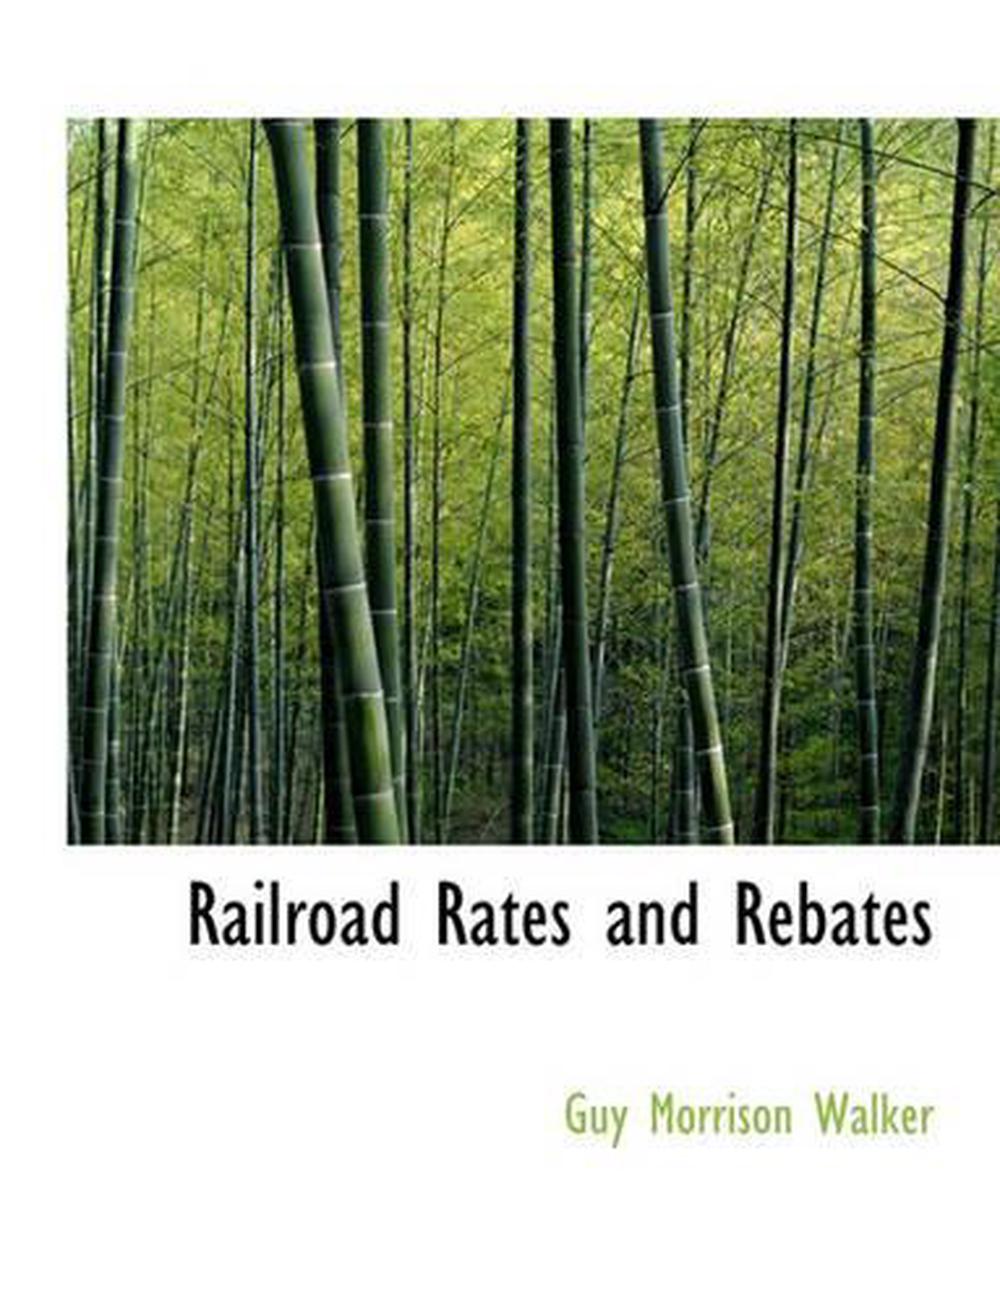 railroad-rates-and-rebates-by-guy-morrison-walker-english-paperback